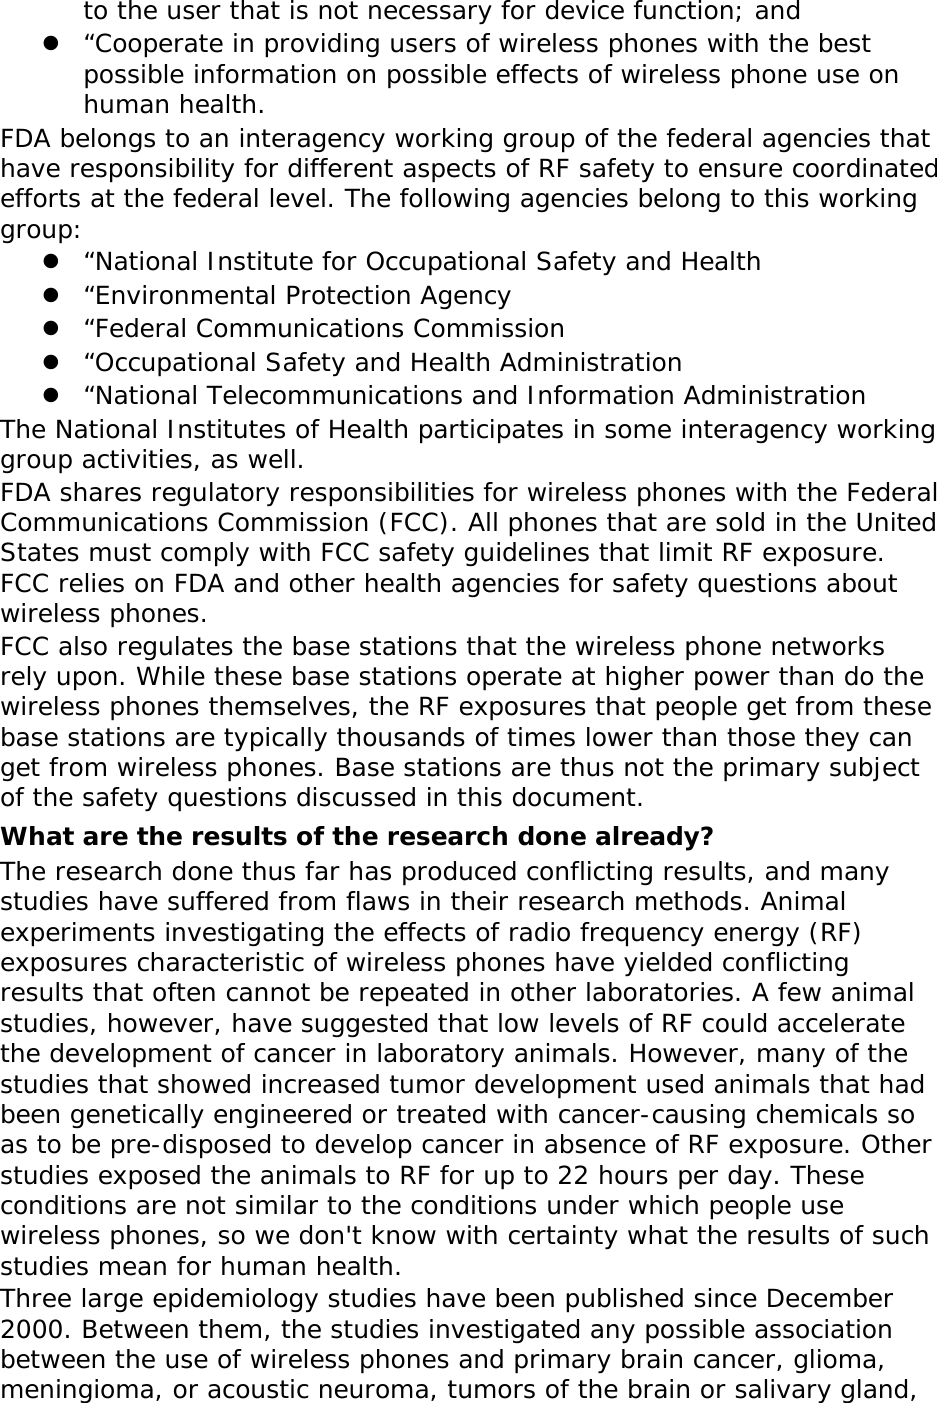   to the user that is not necessary for device function; and z “Cooperate in providing users of wireless phones with the best possible information on possible effects of wireless phone use on human health. FDA belongs to an interagency working group of the federal agencies that have responsibility for different aspects of RF safety to ensure coordinated efforts at the federal level. The following agencies belong to this working group: z “National Institute for Occupational Safety and Health z “Environmental Protection Agency z “Federal Communications Commission z “Occupational Safety and Health Administration z “National Telecommunications and Information Administration The National Institutes of Health participates in some interagency working group activities, as well. FDA shares regulatory responsibilities for wireless phones with the Federal Communications Commission (FCC). All phones that are sold in the United States must comply with FCC safety guidelines that limit RF exposure. FCC relies on FDA and other health agencies for safety questions about wireless phones. FCC also regulates the base stations that the wireless phone networks rely upon. While these base stations operate at higher power than do the wireless phones themselves, the RF exposures that people get from these base stations are typically thousands of times lower than those they can get from wireless phones. Base stations are thus not the primary subject of the safety questions discussed in this document. What are the results of the research done already? The research done thus far has produced conflicting results, and many studies have suffered from flaws in their research methods. Animal experiments investigating the effects of radio frequency energy (RF) exposures characteristic of wireless phones have yielded conflicting results that often cannot be repeated in other laboratories. A few animal studies, however, have suggested that low levels of RF could accelerate the development of cancer in laboratory animals. However, many of the studies that showed increased tumor development used animals that had been genetically engineered or treated with cancer-causing chemicals so as to be pre-disposed to develop cancer in absence of RF exposure. Other studies exposed the animals to RF for up to 22 hours per day. These conditions are not similar to the conditions under which people use wireless phones, so we don&apos;t know with certainty what the results of such studies mean for human health. Three large epidemiology studies have been published since December 2000. Between them, the studies investigated any possible association between the use of wireless phones and primary brain cancer, glioma, meningioma, or acoustic neuroma, tumors of the brain or salivary gland, 